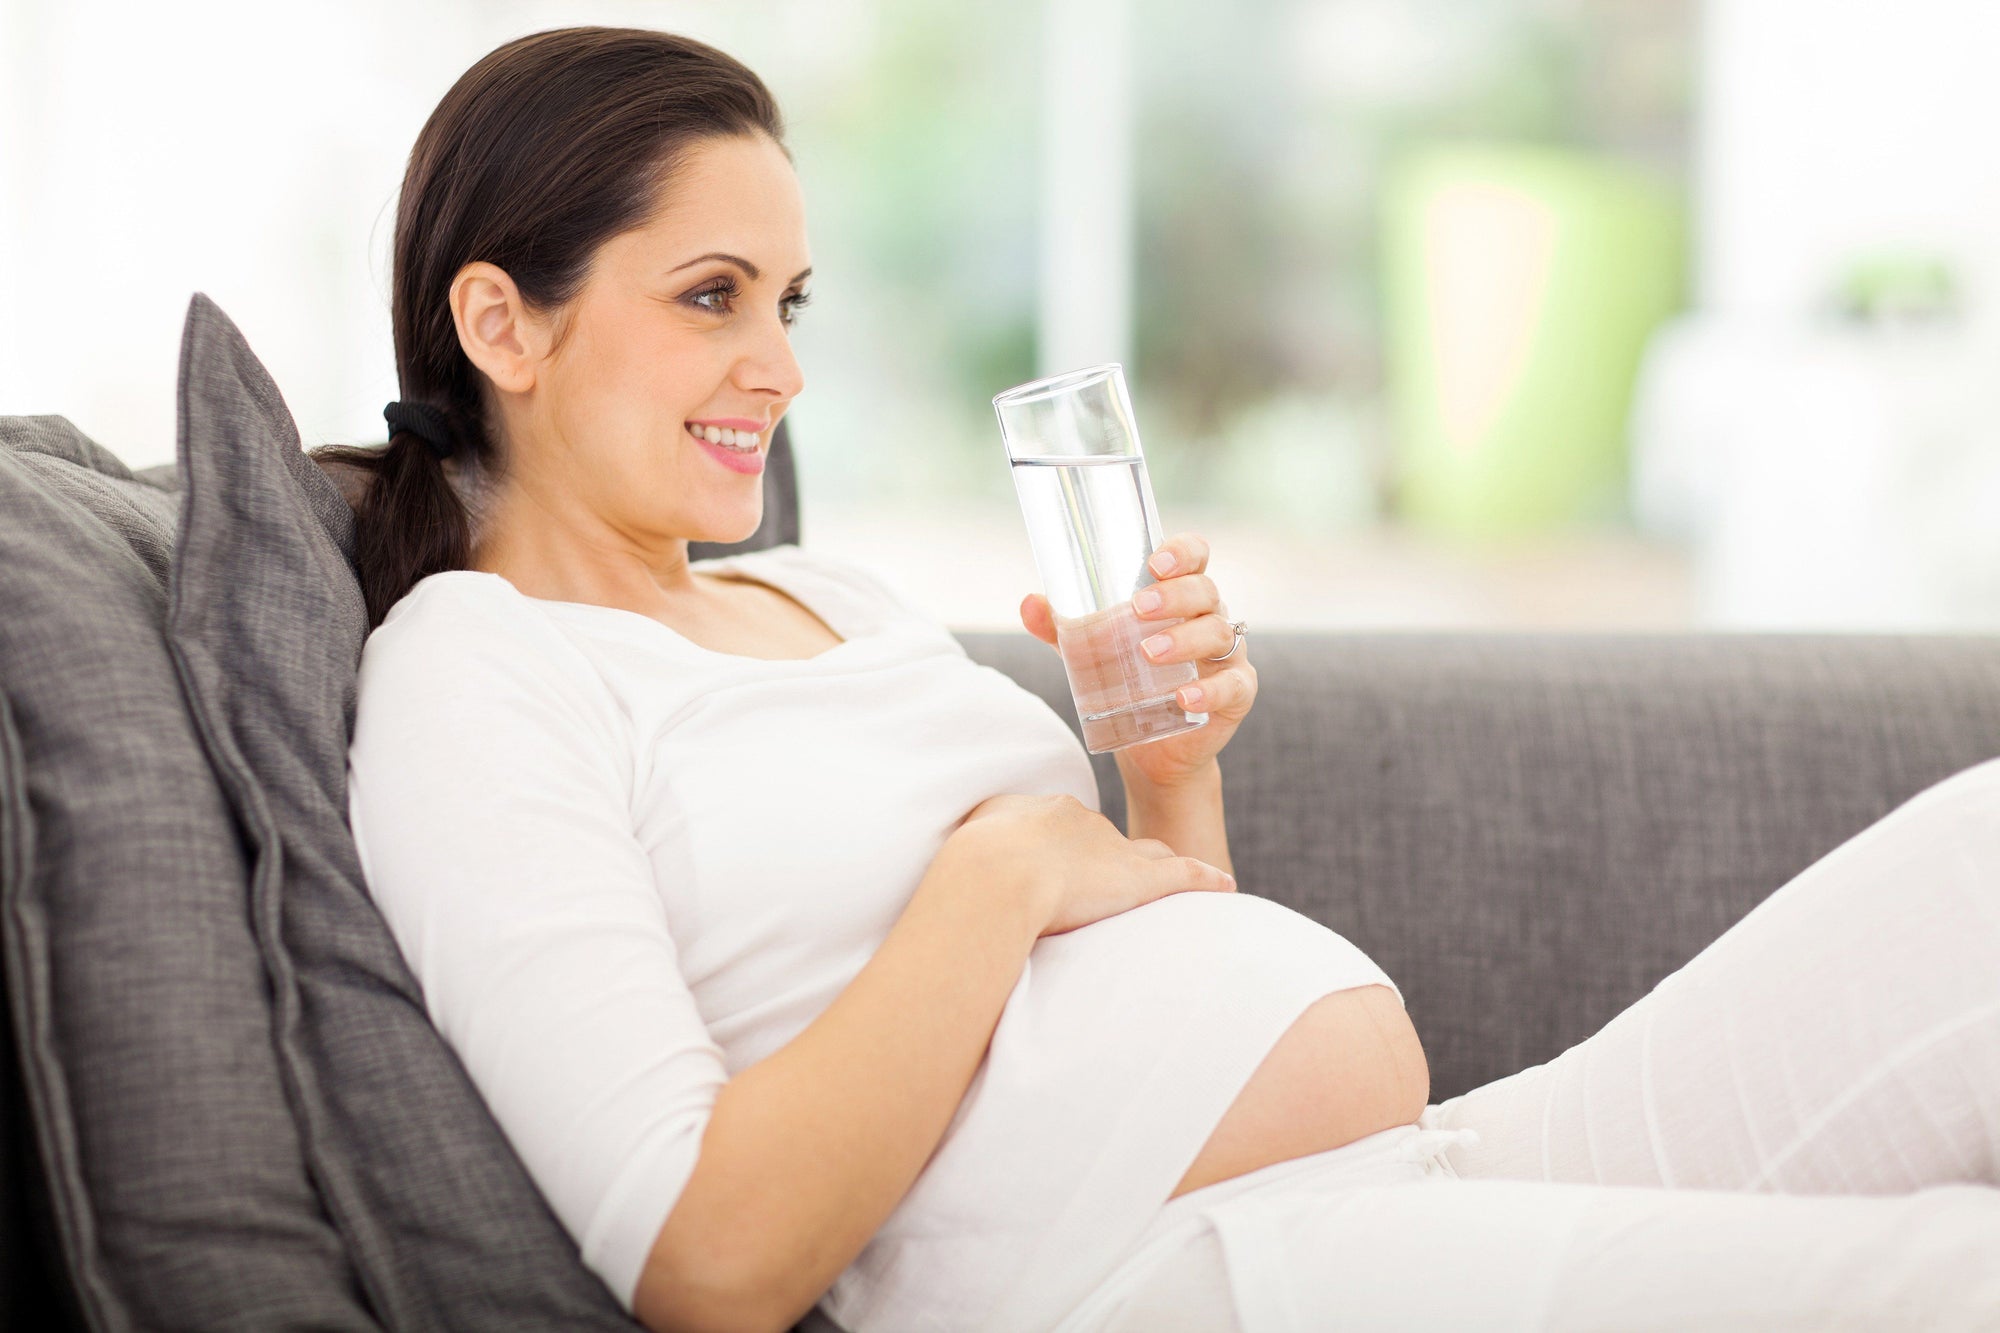 Beat the Heat Pregnancy Tips for the Summer!